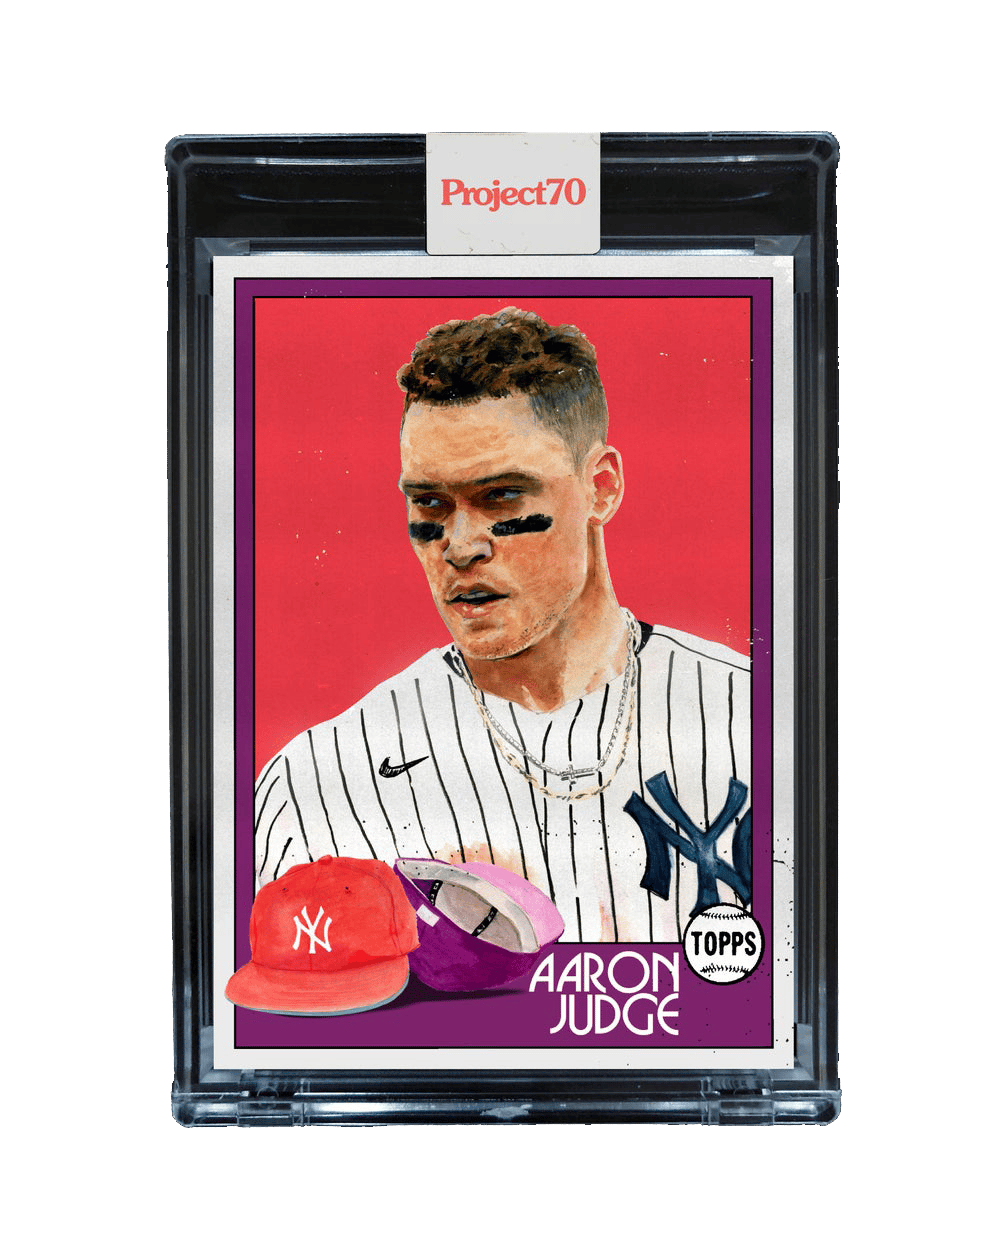 Image of Autographed Aaron Judge Topps Project 70 Card by Jacob Rochester 